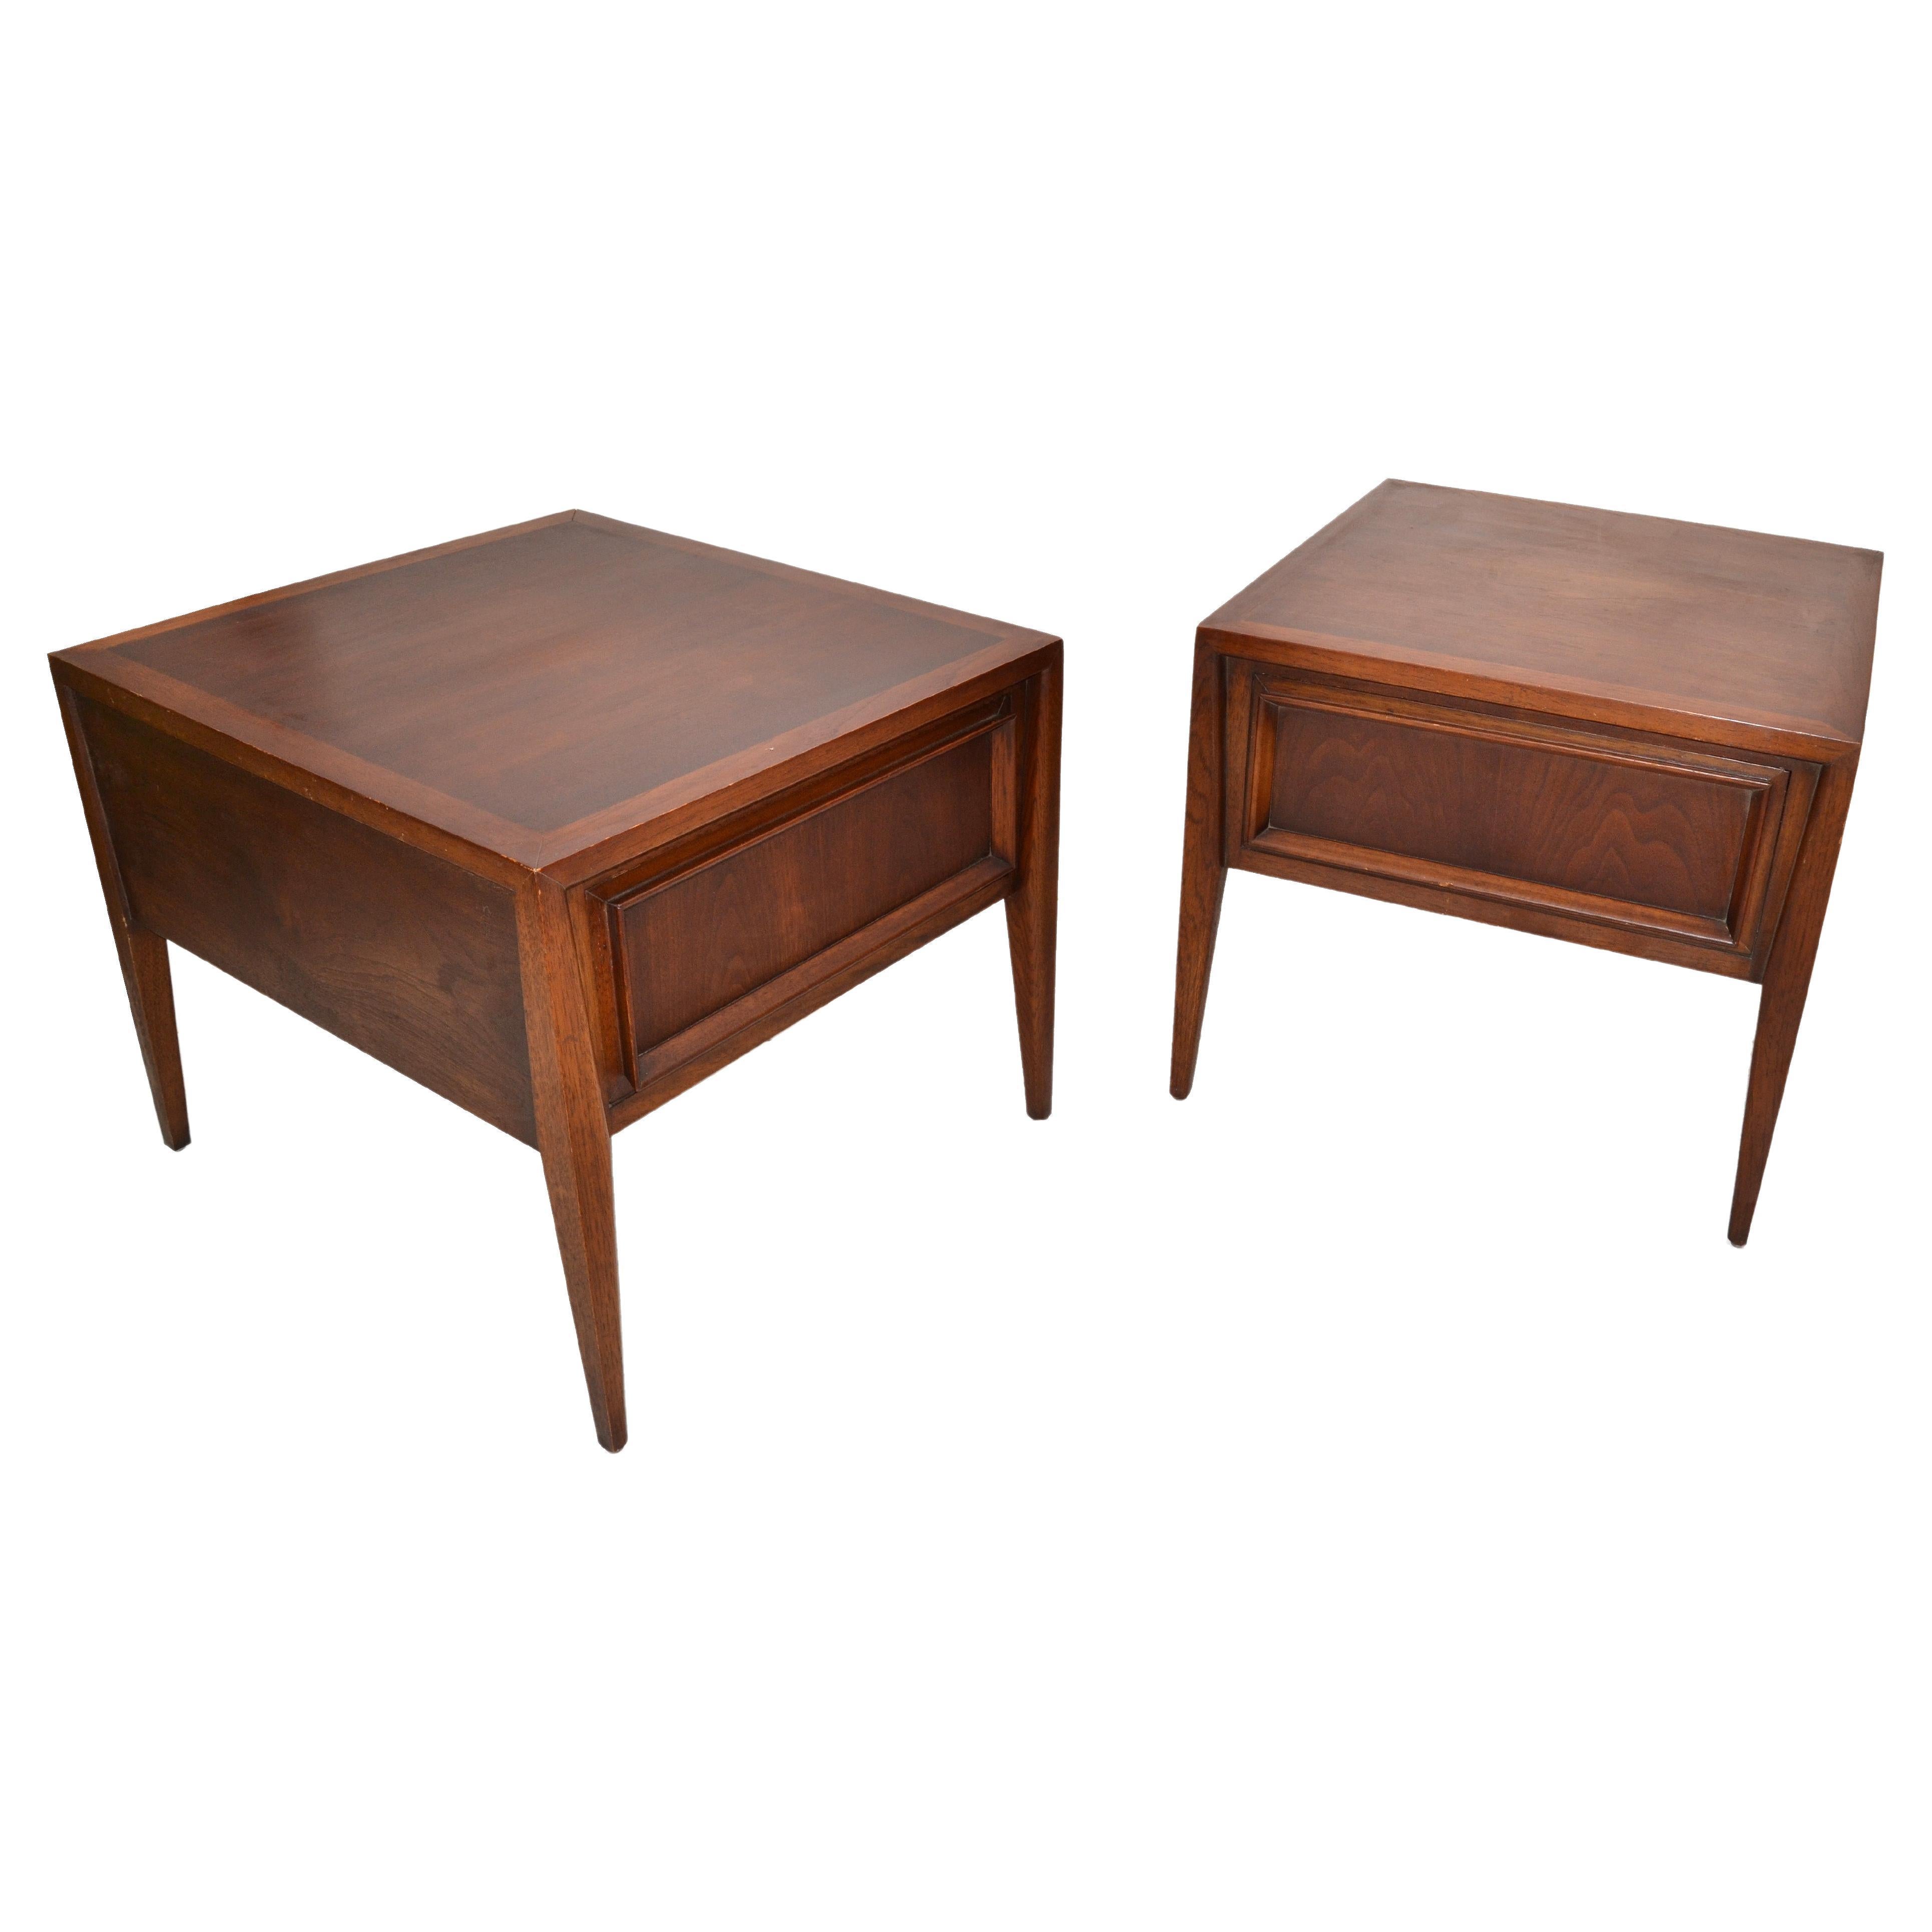 Pair of classical Vanleigh Furniture, New York night stands, bedside tables with one dovetailed drawer in Walnut.
American made in the late 1960s. 
Makers mark inside the drawer.
  